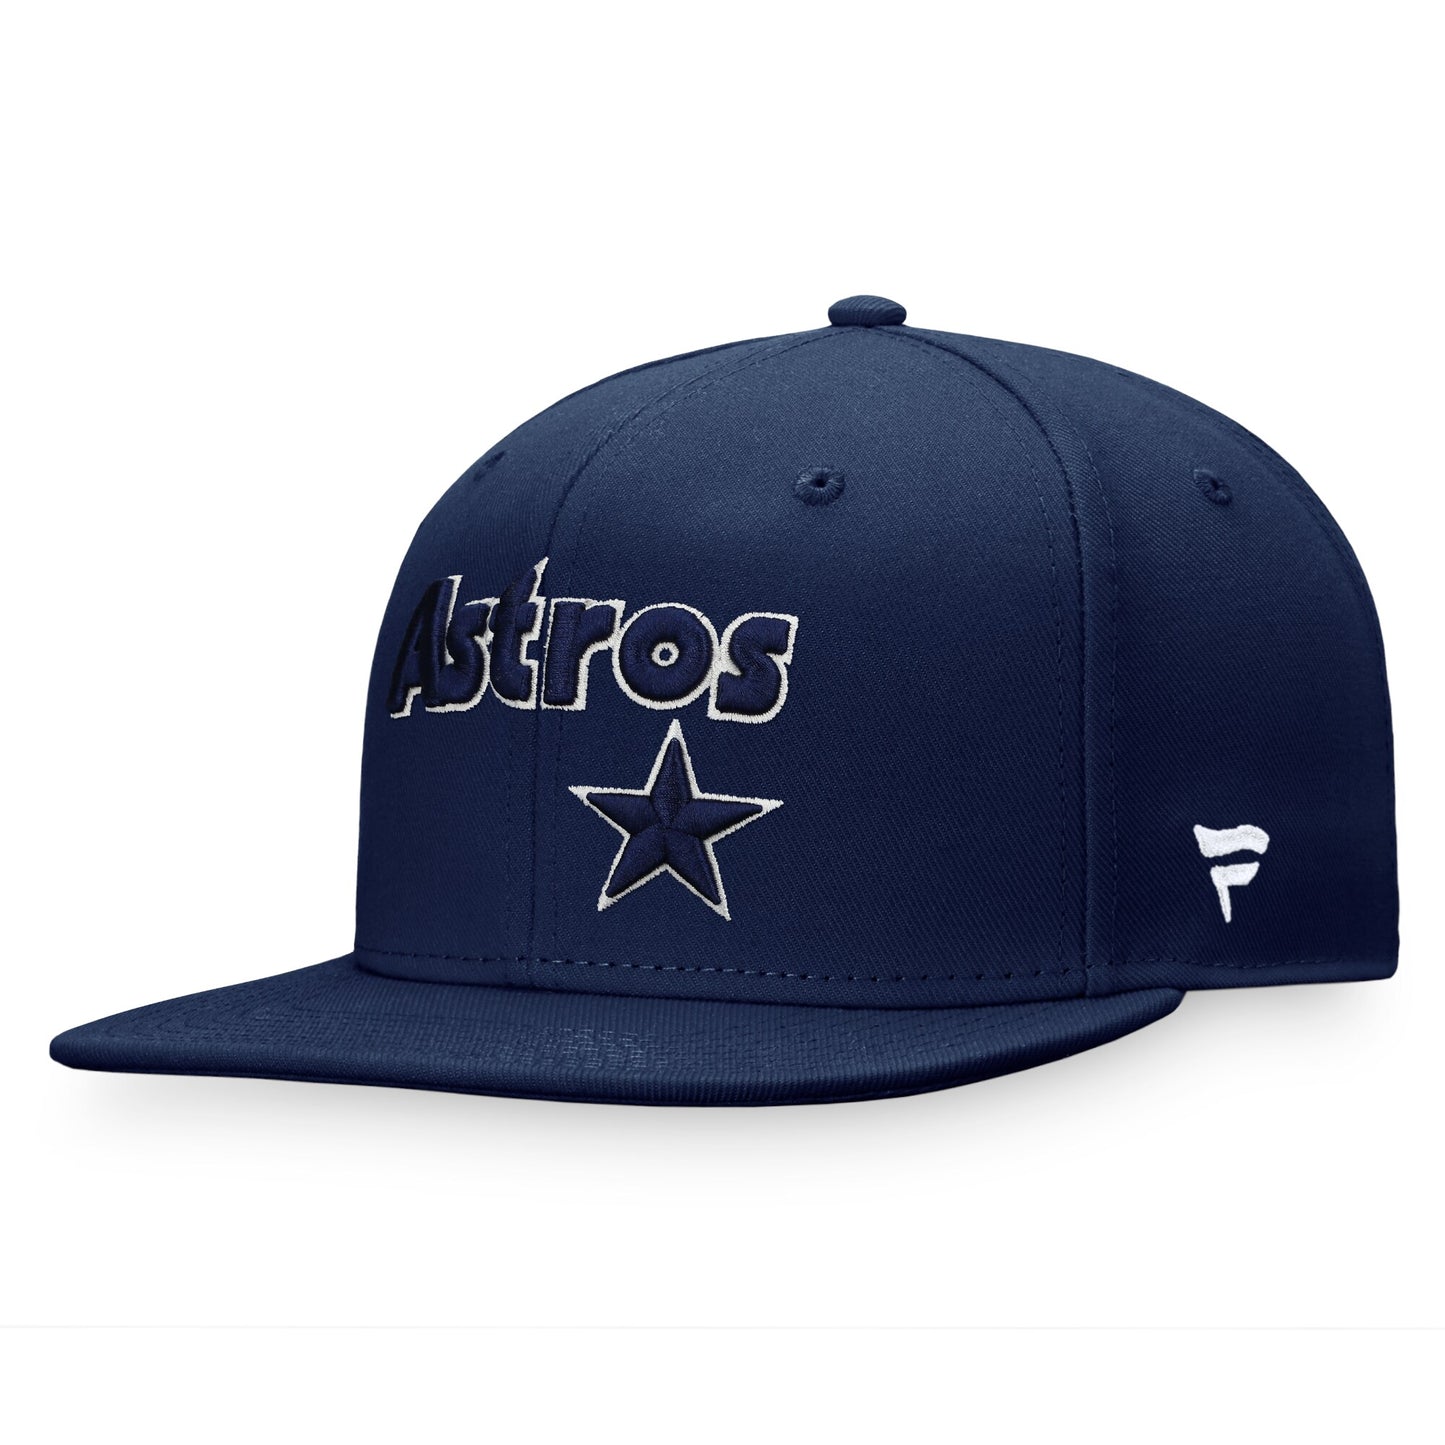 Houston Astros Fanatics Branded Cooperstown Collection Fitted Hat - Navy